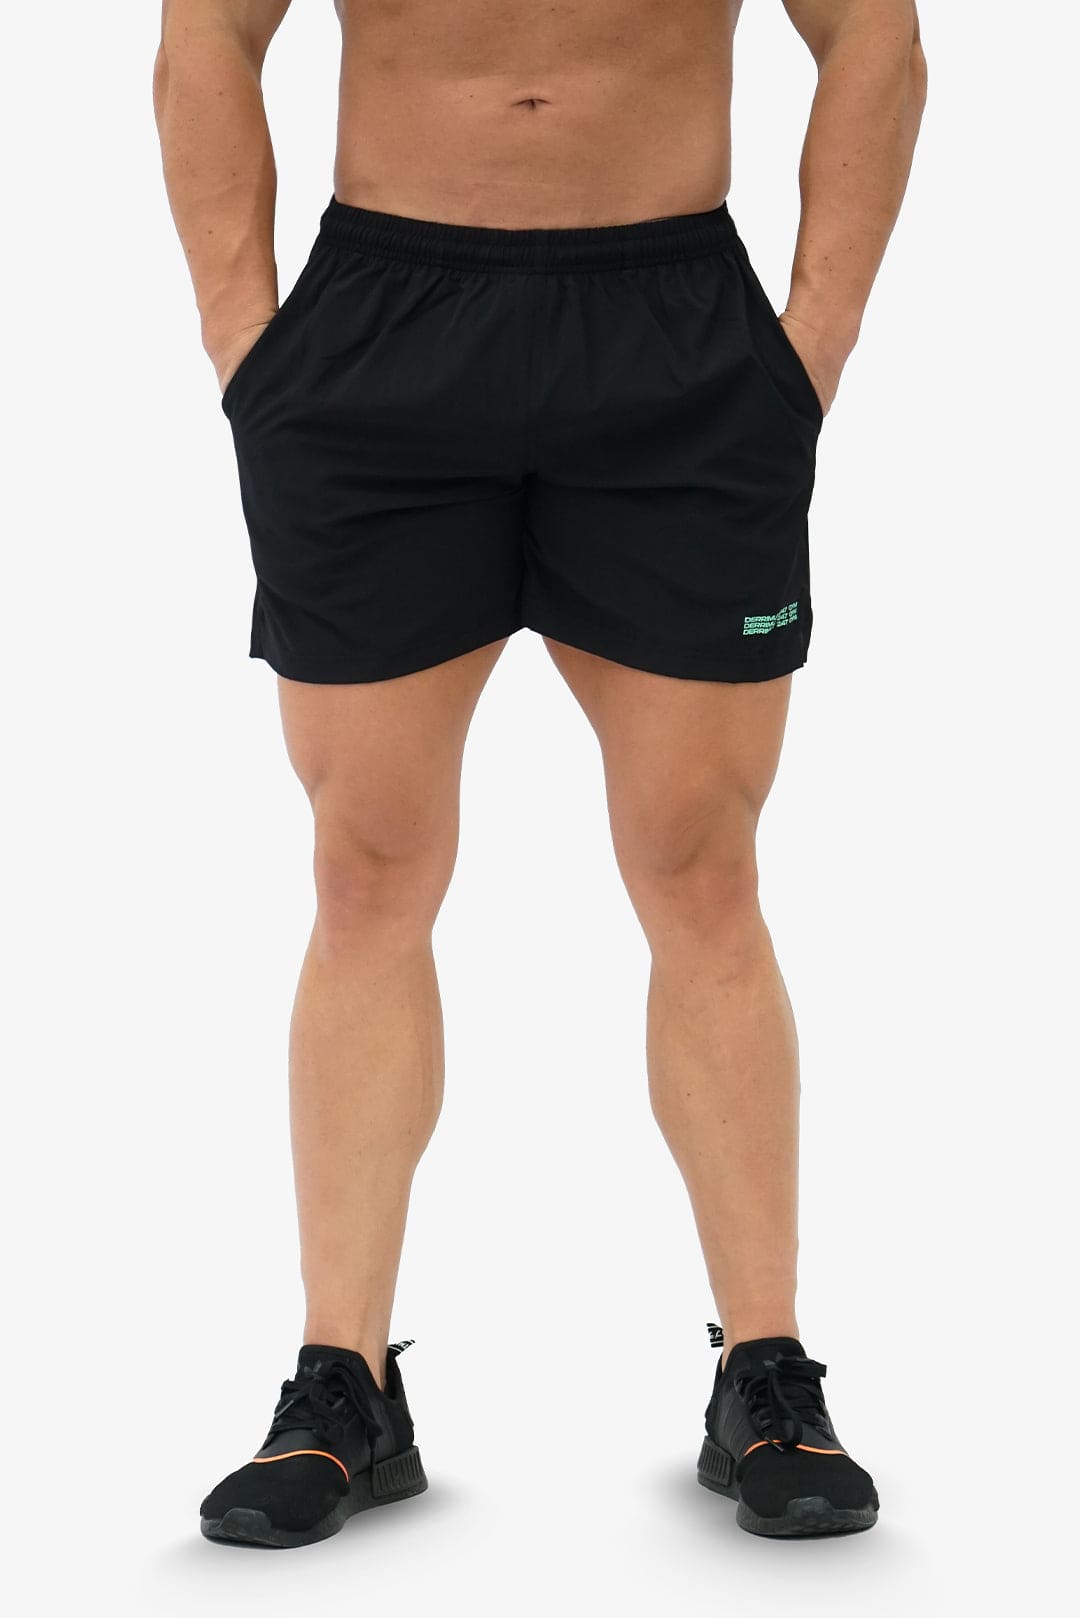 TRIPLE STACKED SHORTS -  BLACK/GREEN